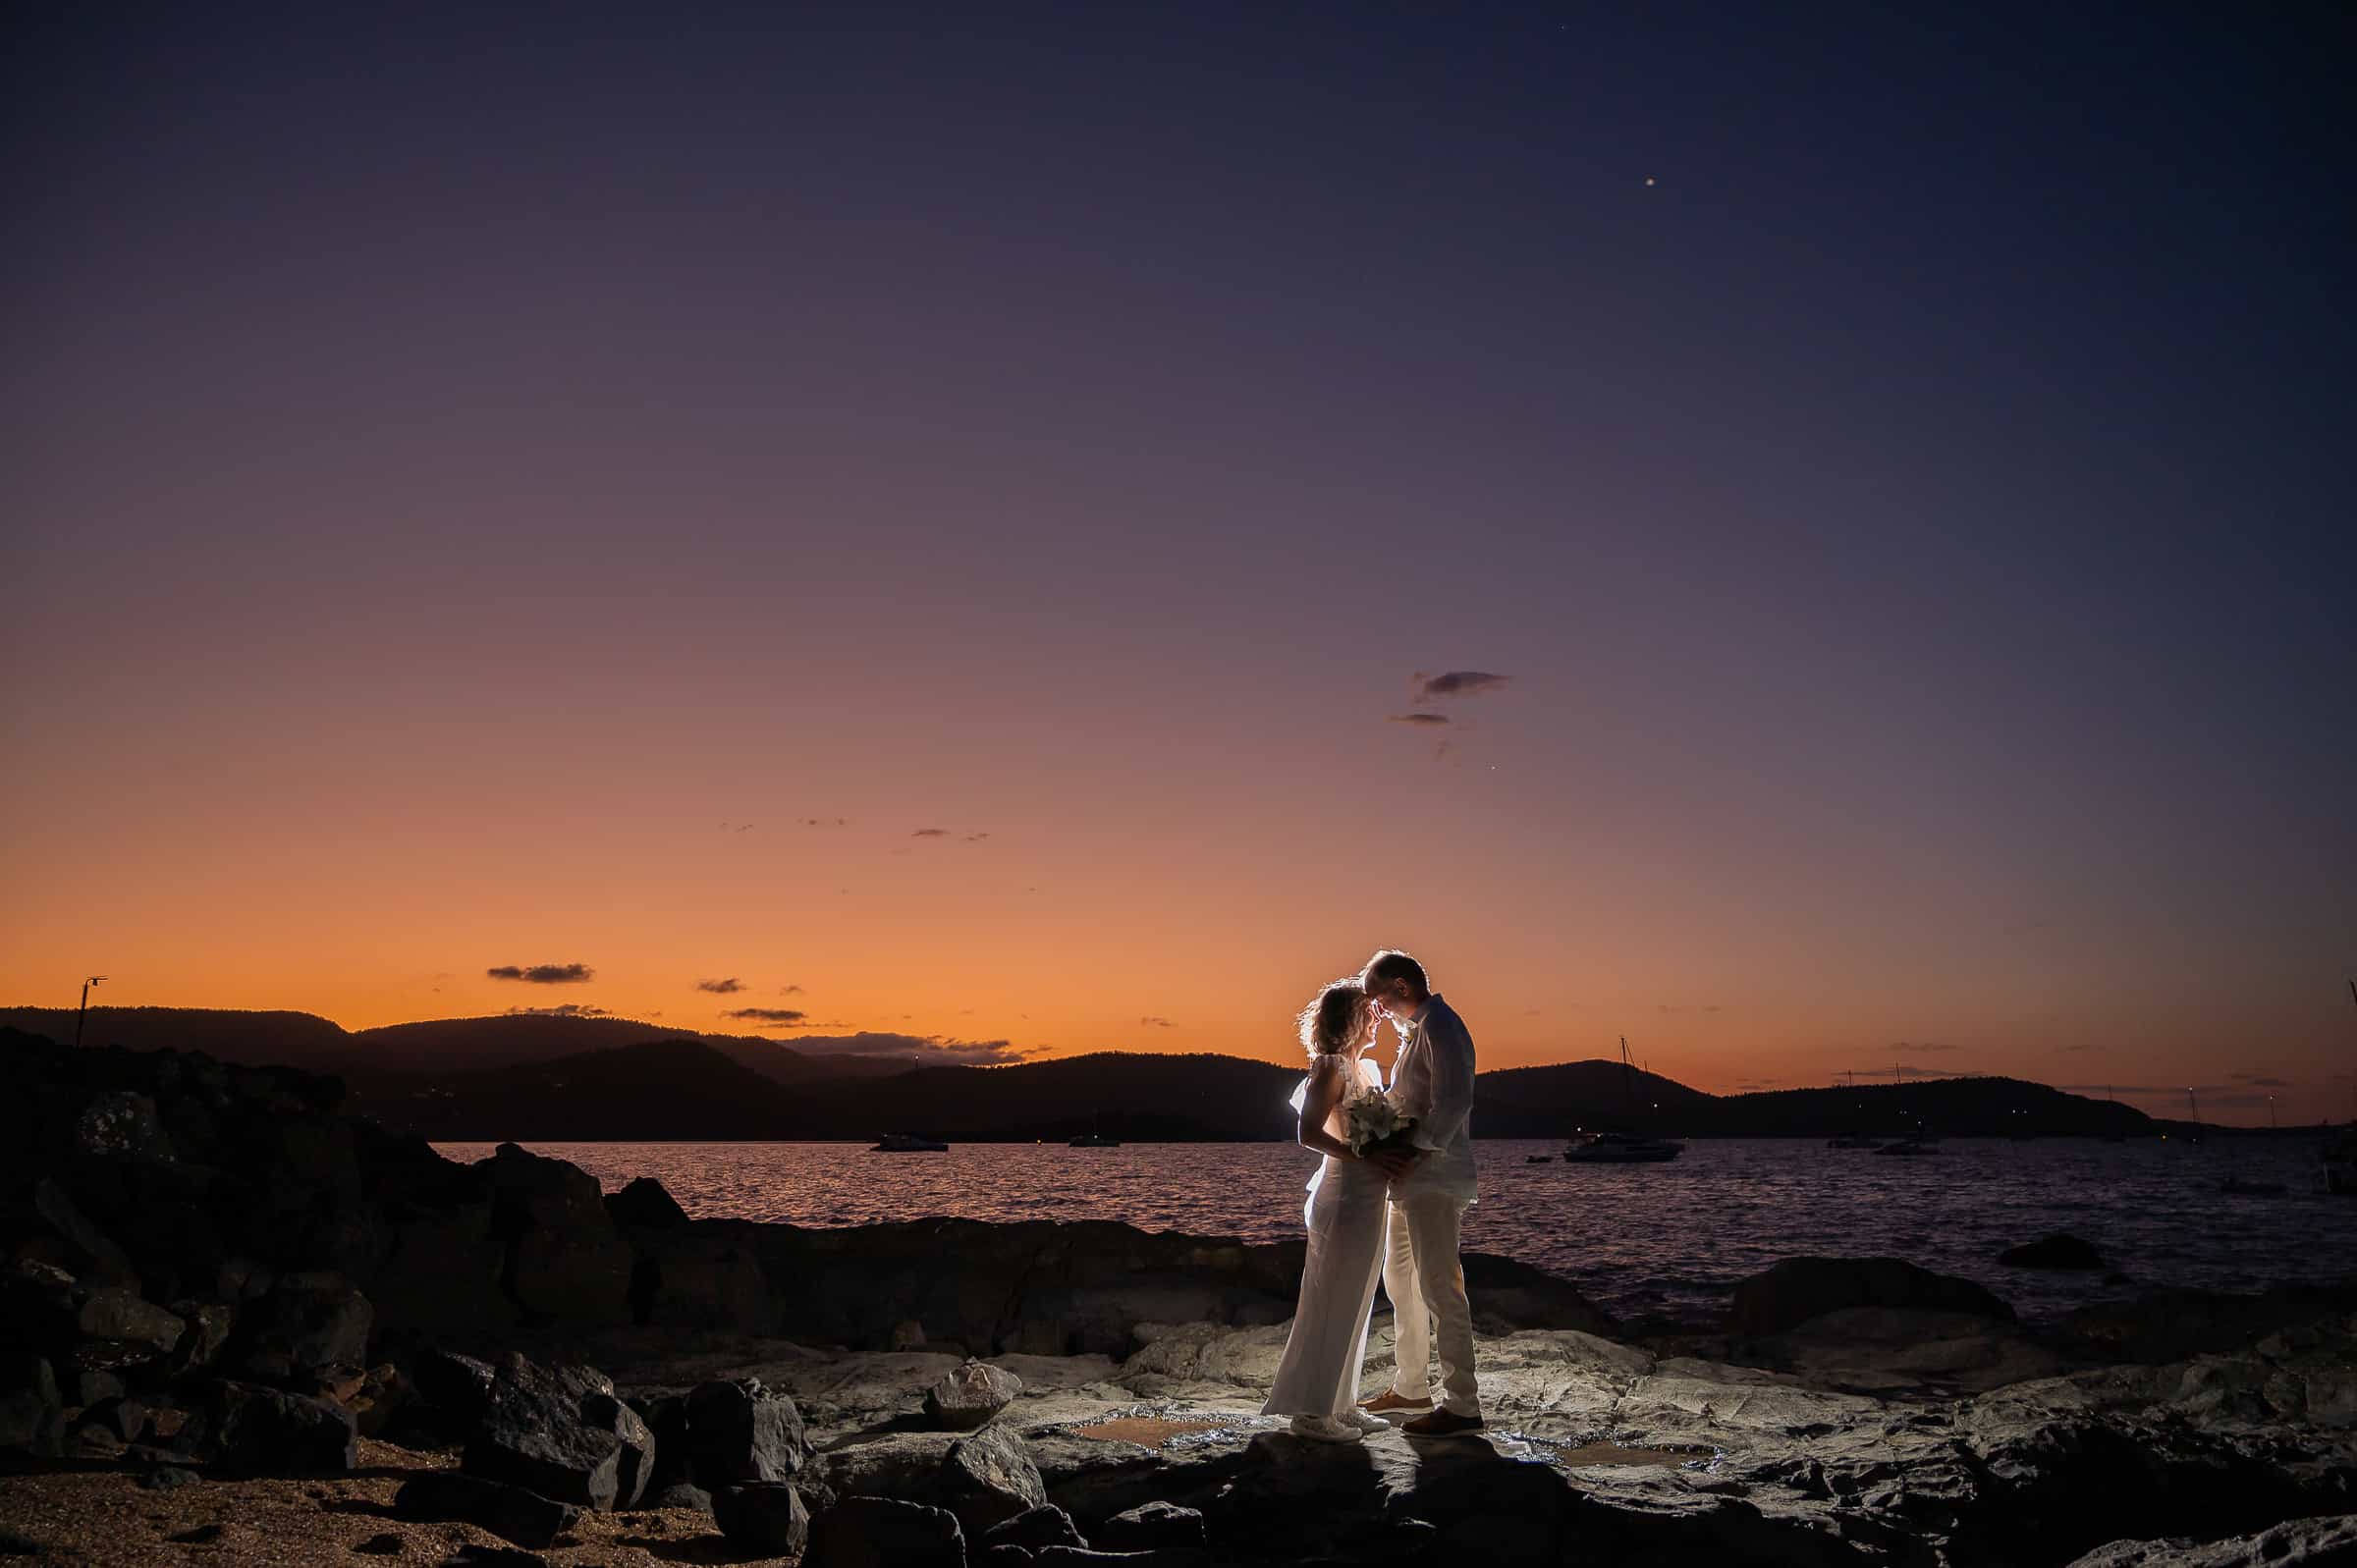 Peter and Suzanne’s Romantic Mirage Whitsundays Elopement in Airlie Beach